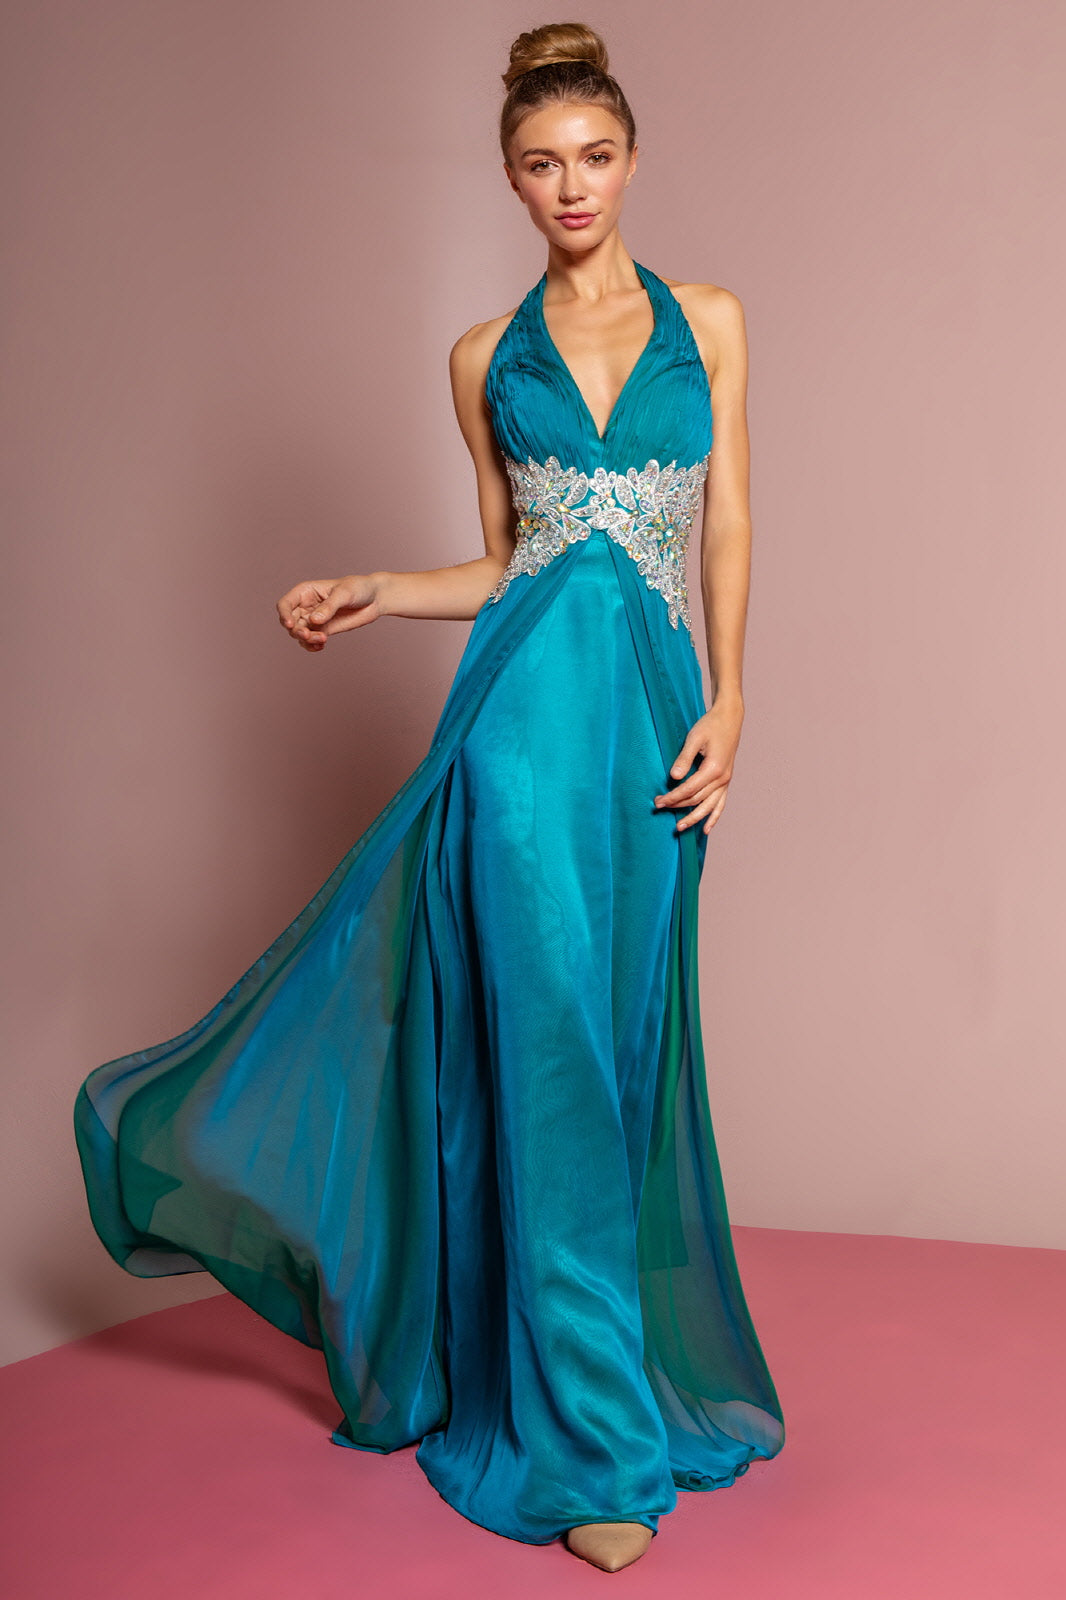 Halter Floor Length Dress Accented with Lace and Jewel-smcdress